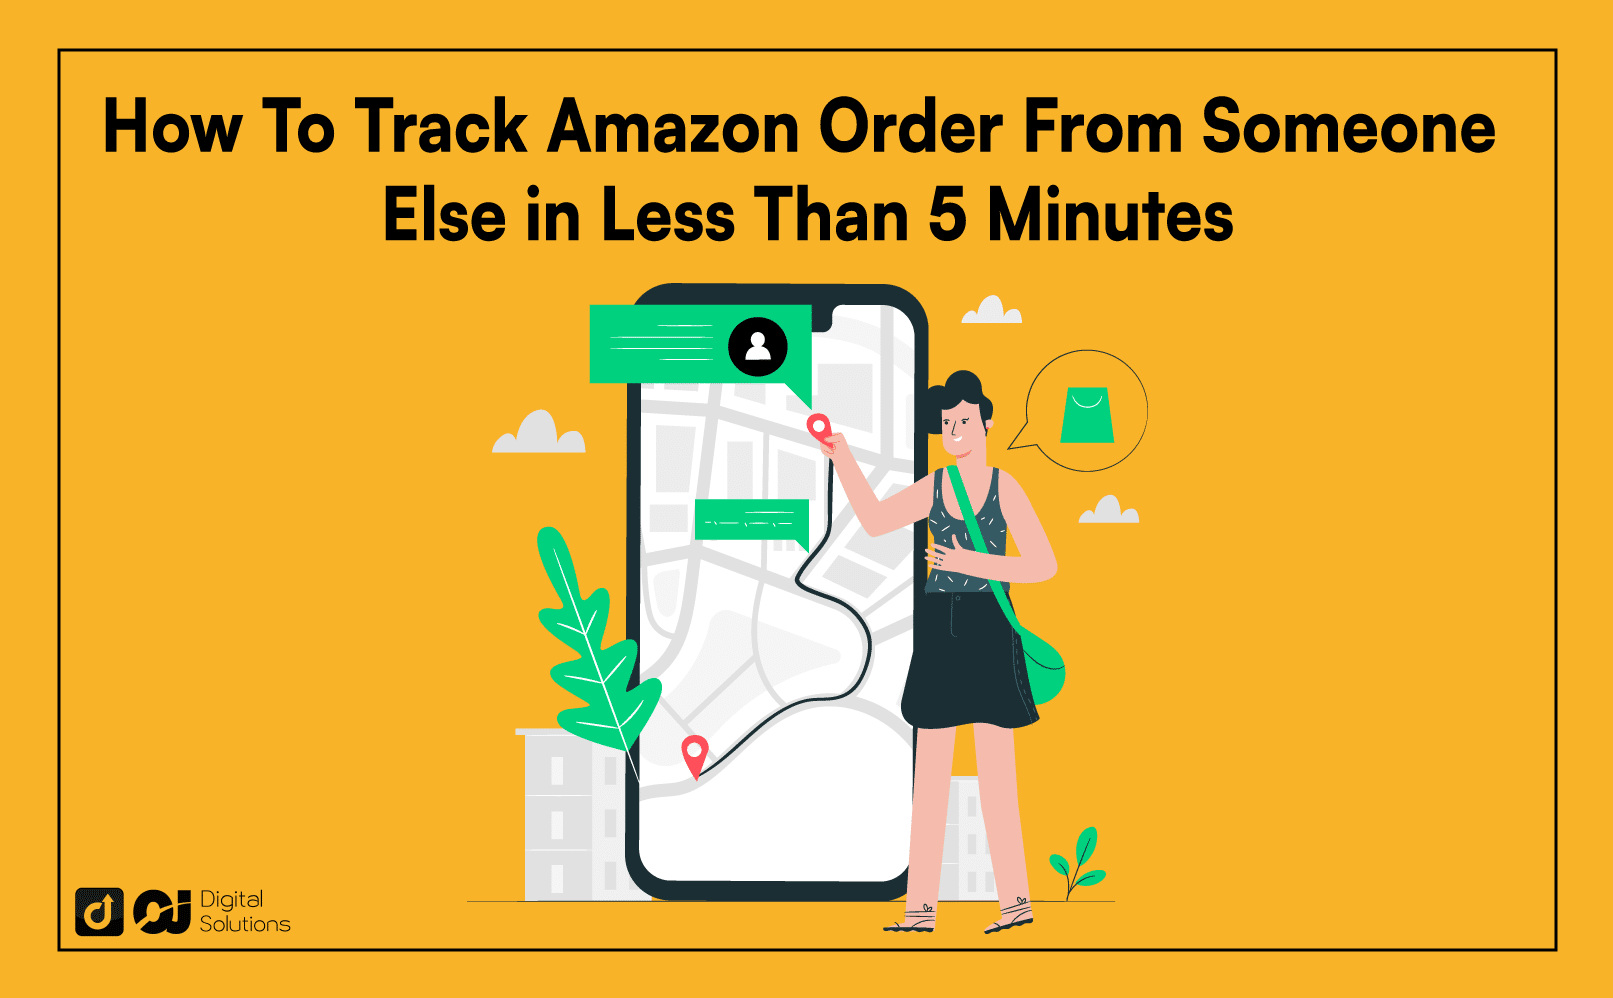 How to Track Amazon Order From Someone Else - 4 Easy Ways